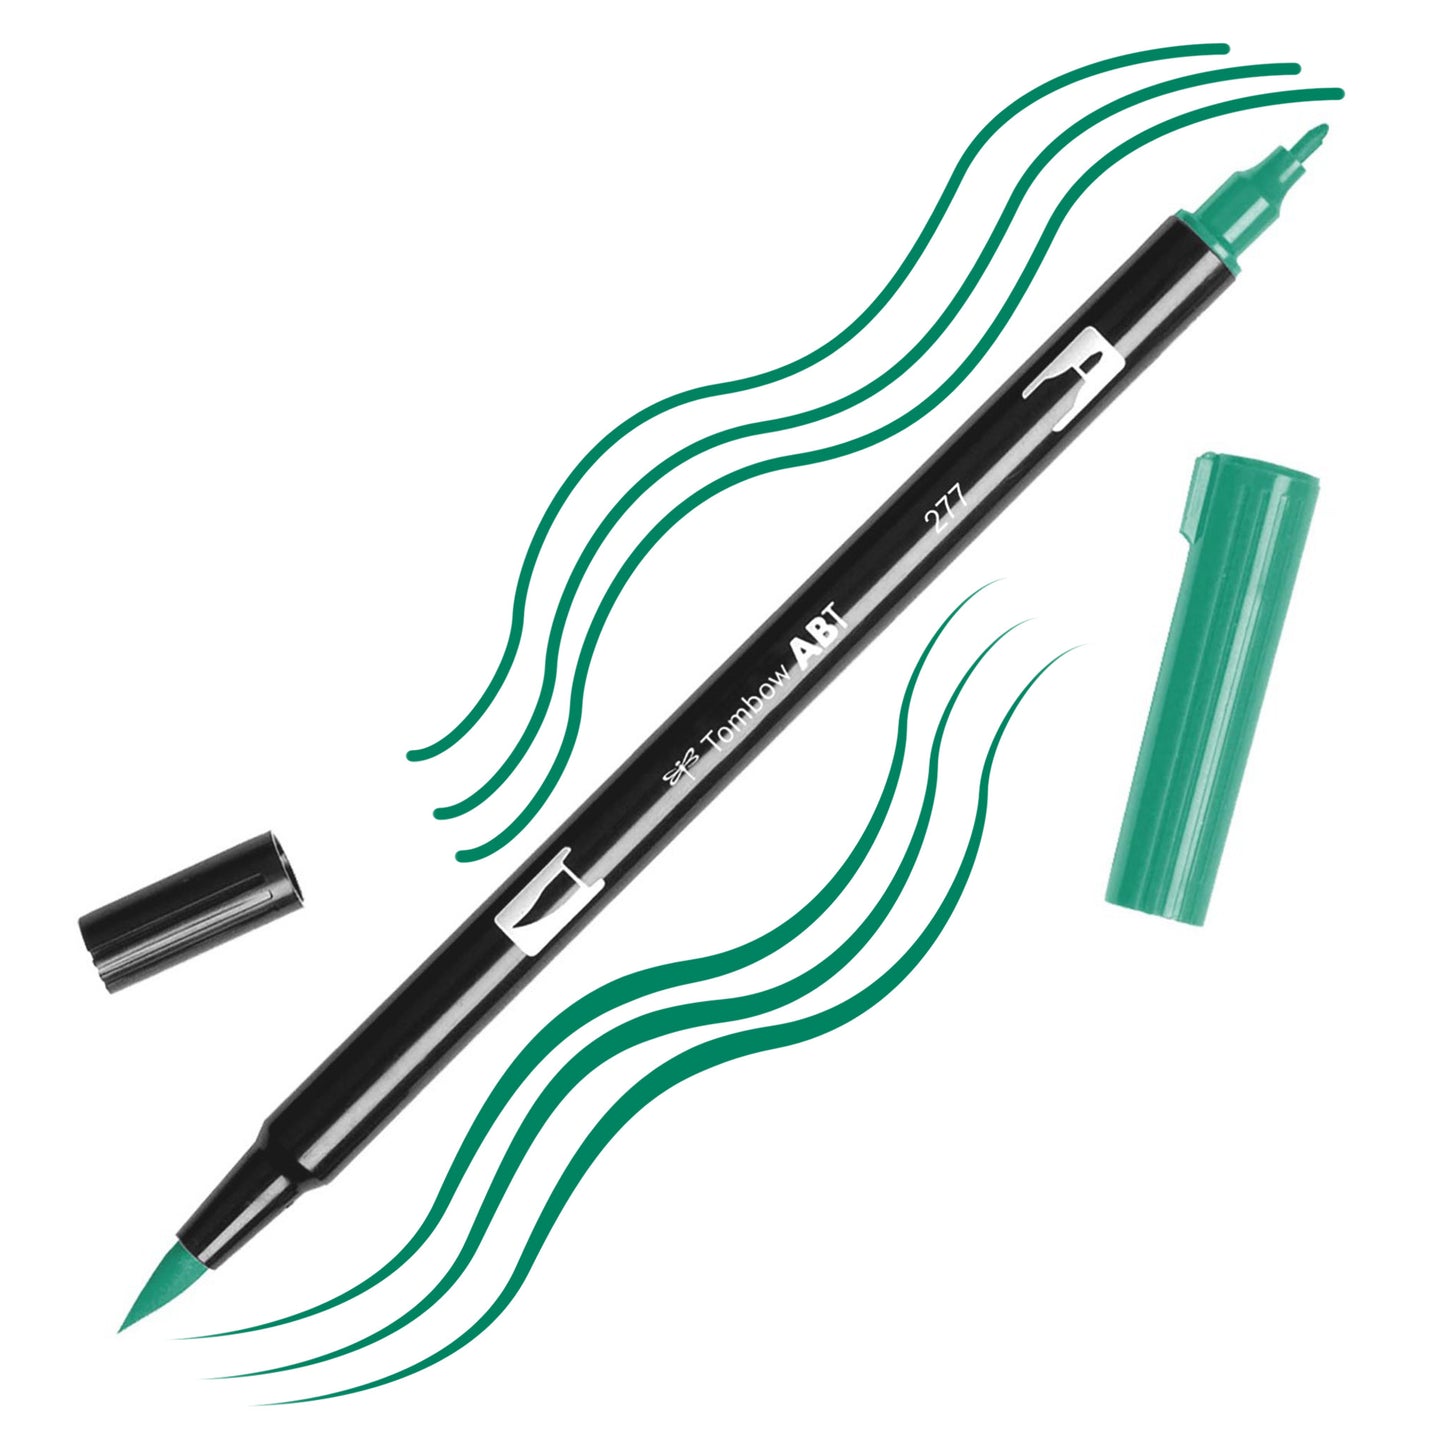 Dark Green Tombow double-headed brush-pen with a flexible nylon fiber brush tip and a fine tip against a white background with Dark Green strokes